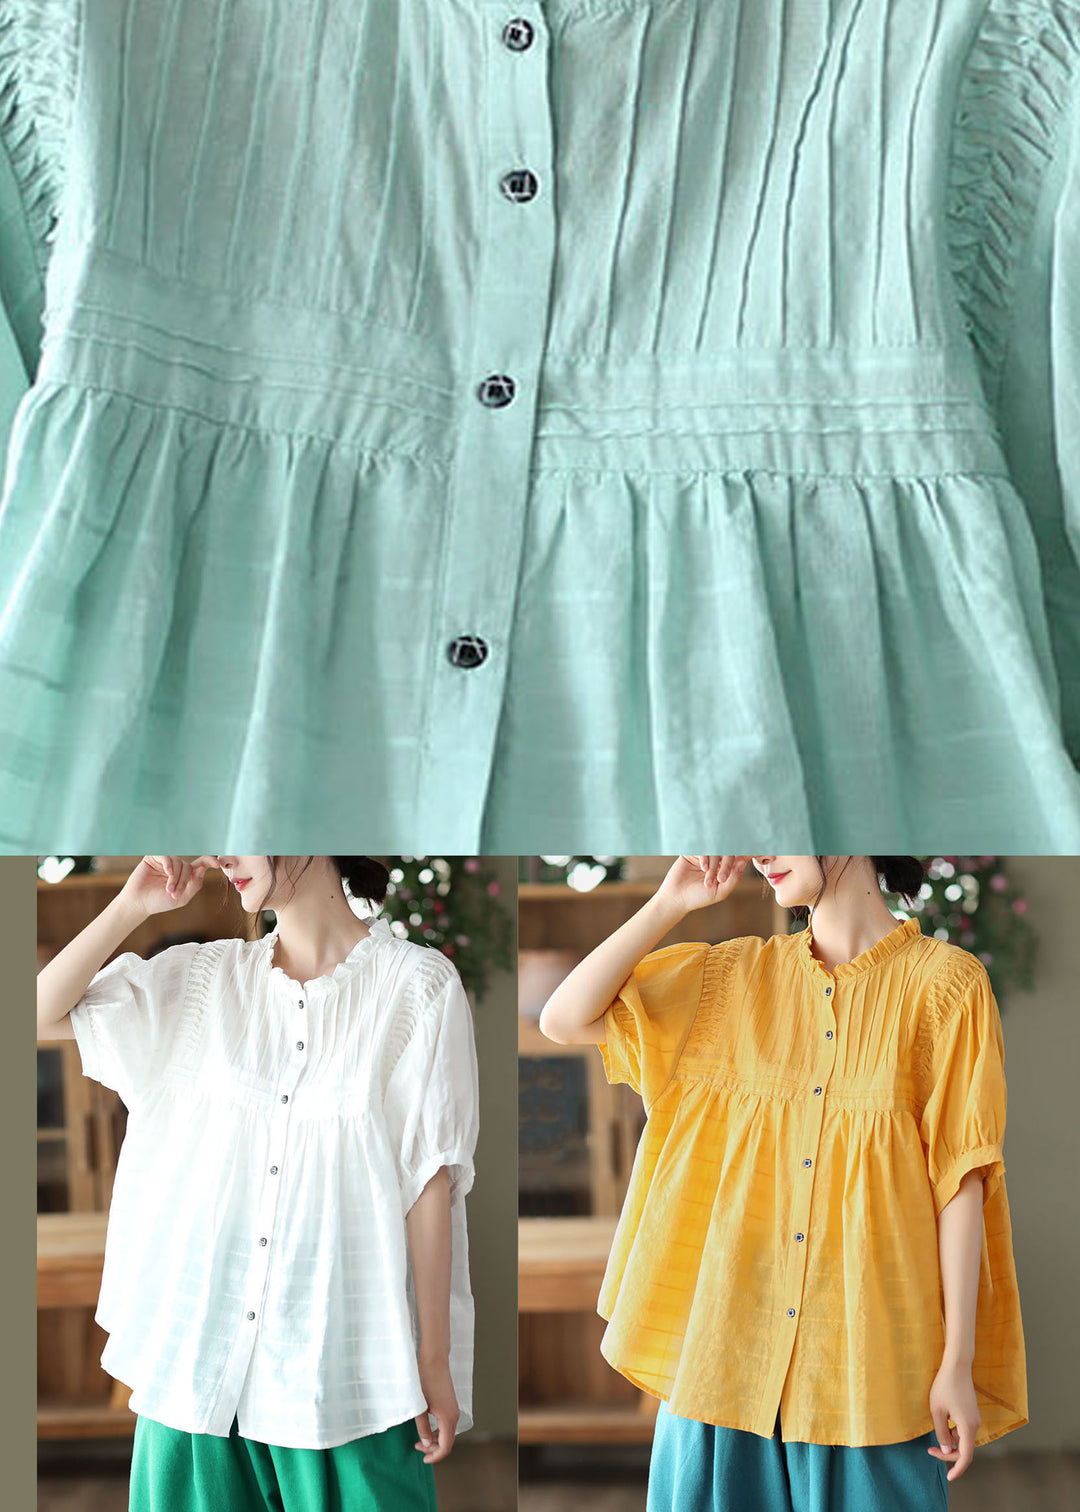 Boutique Yellow Ruffled Button Patchwork Cotton Blouse Top Summer